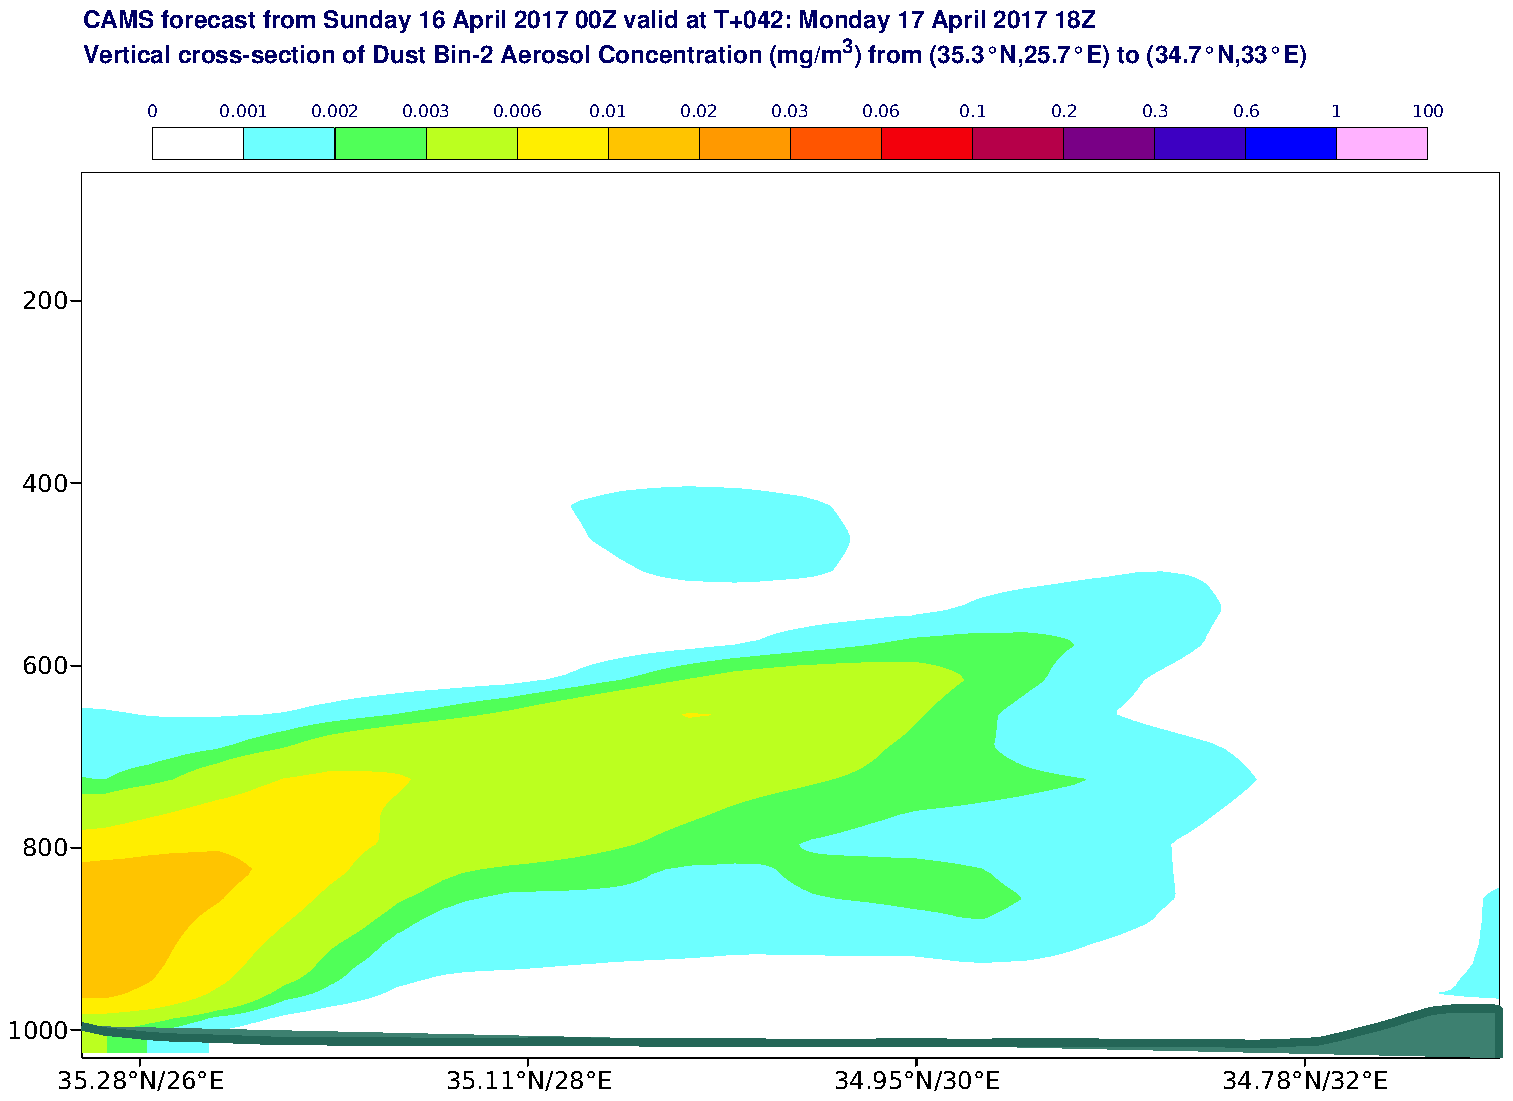 Vertical cross-section of Dust Bin-2 Aerosol Concentration (mg/m3) valid at T42 - 2017-04-17 18:00